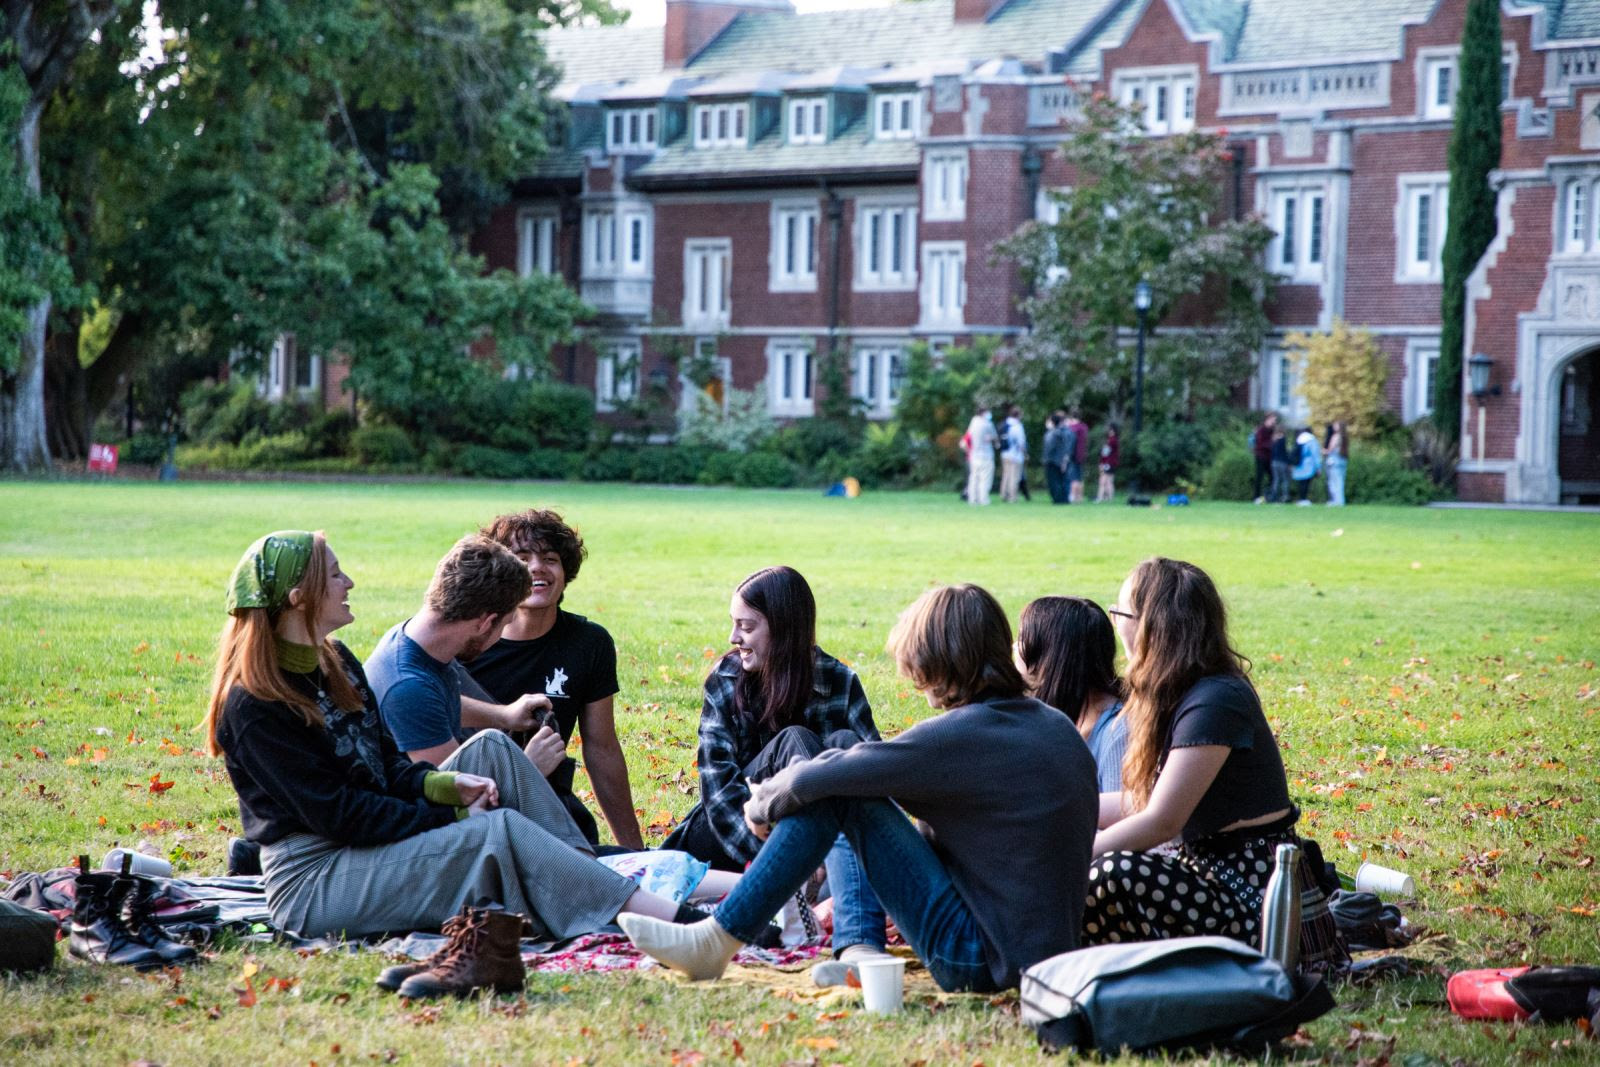 A group of students laughing and talking on the lawn.